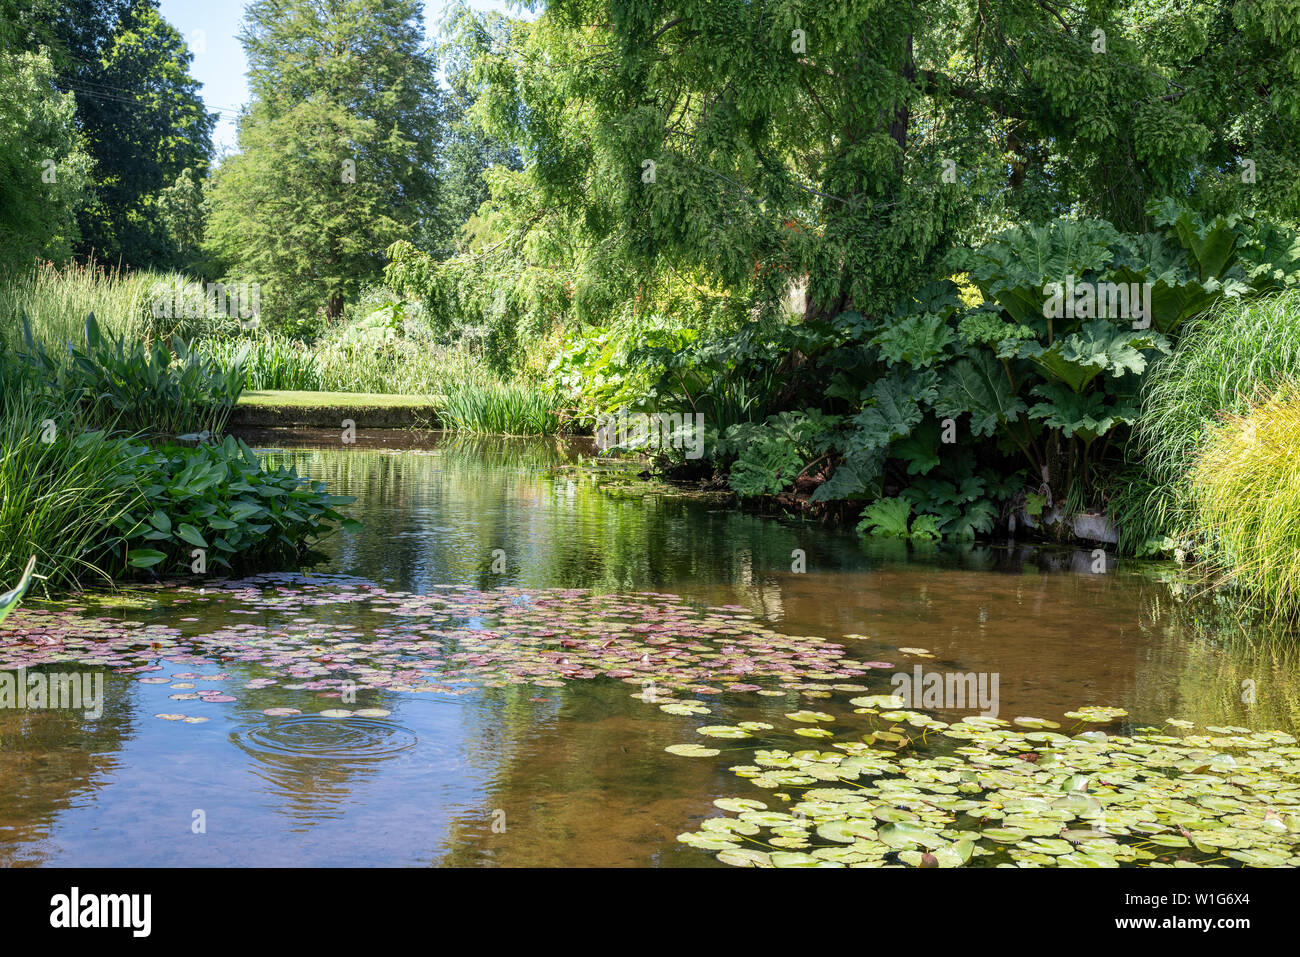 Pond at the Beth Chatto garden, Elmstead, Colchester, Suffolk, UK Stock Photo